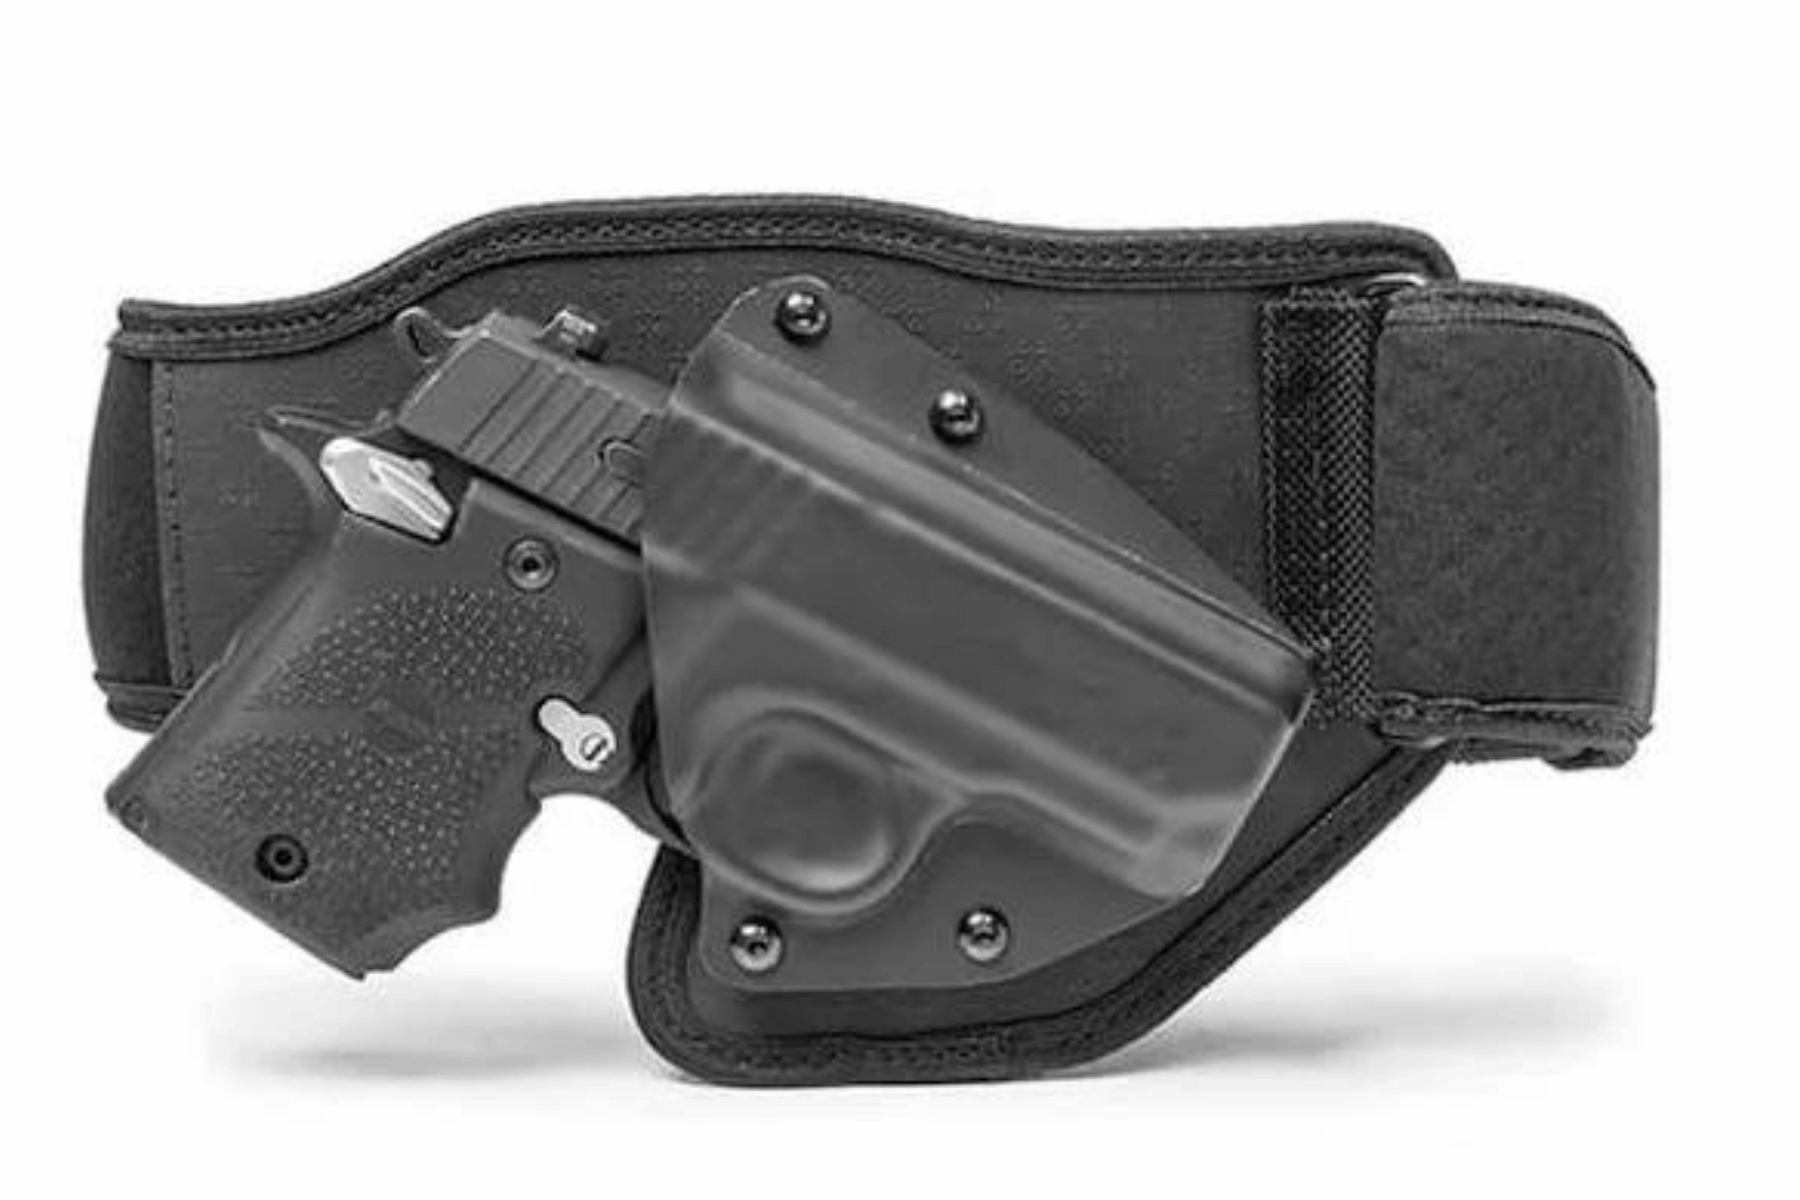 Tactica Defense Belly Band Holster